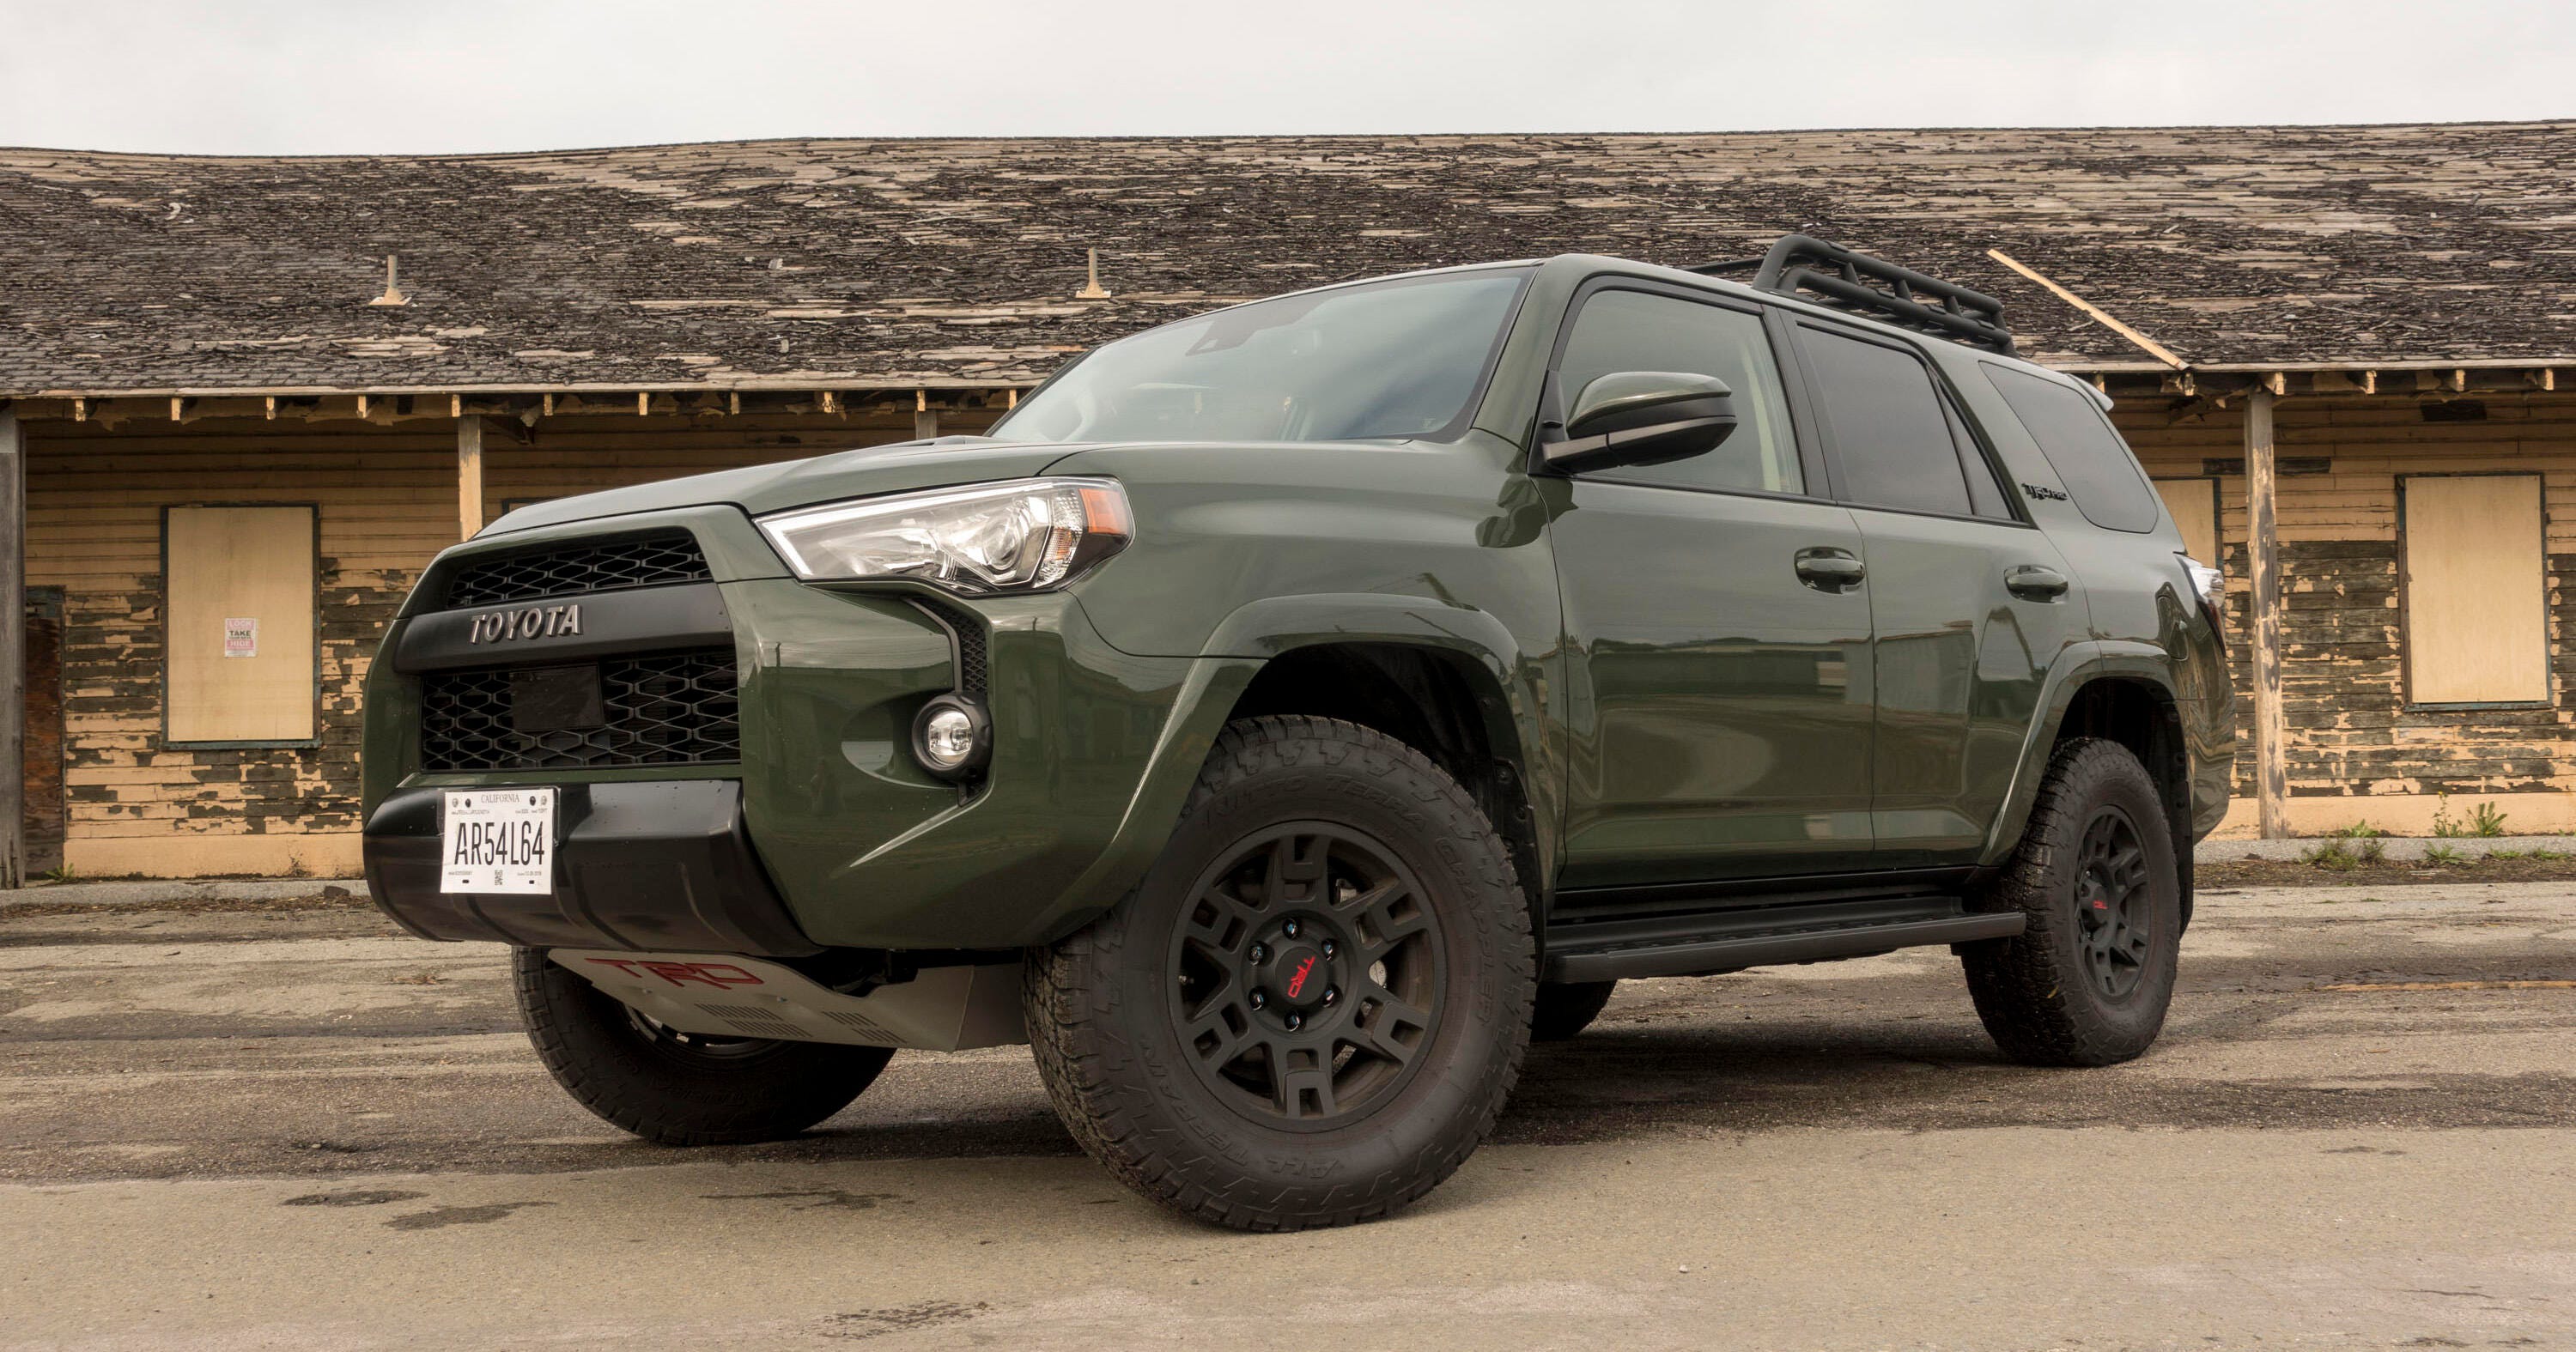 Toyota 4runner Review The Old Dog Gets A Few New Tricks Roadshow